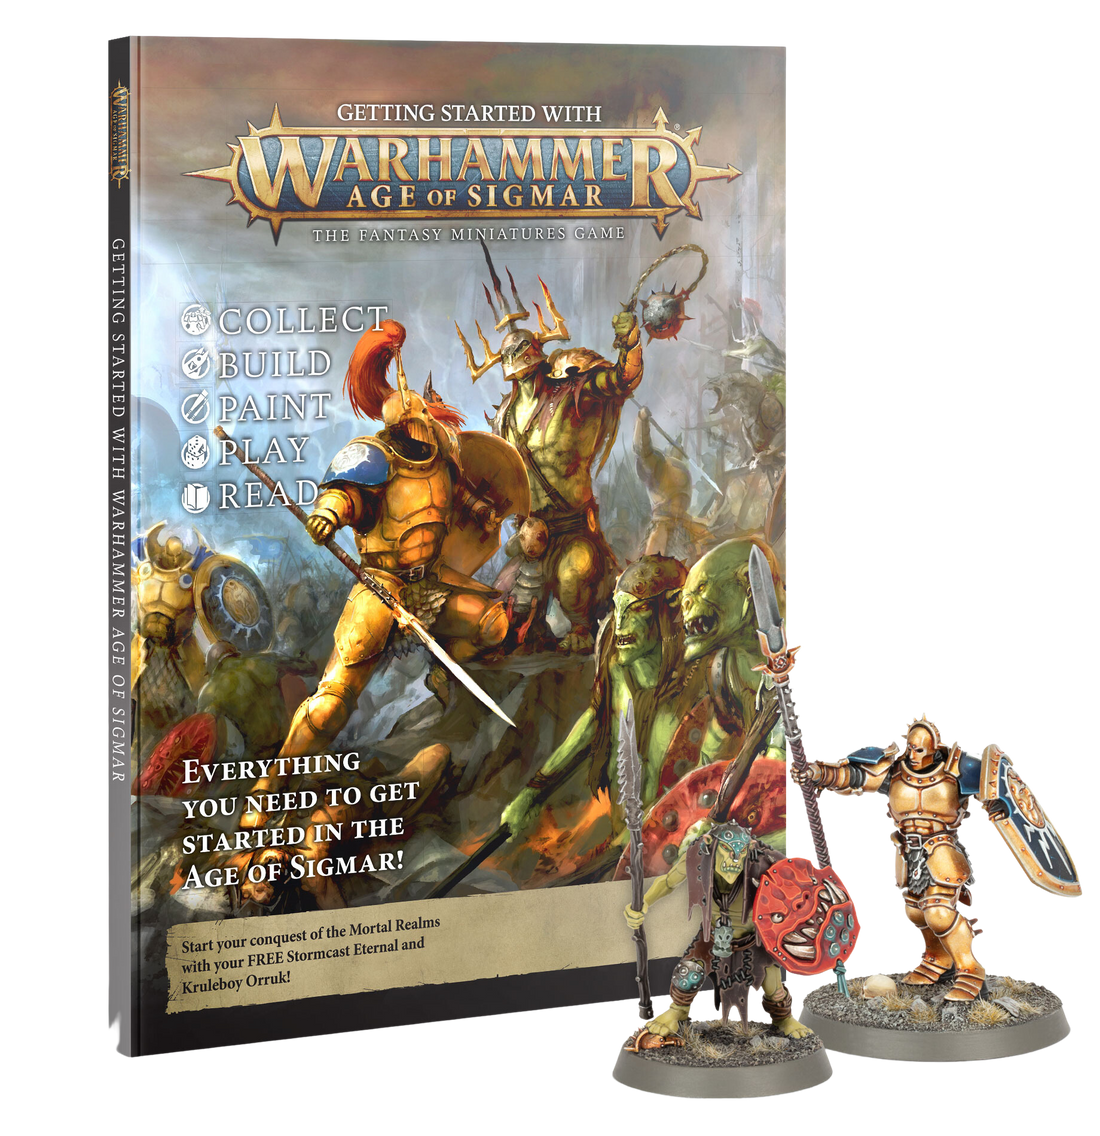 Getting Started with Warhammer Age of Sigmar (2021)